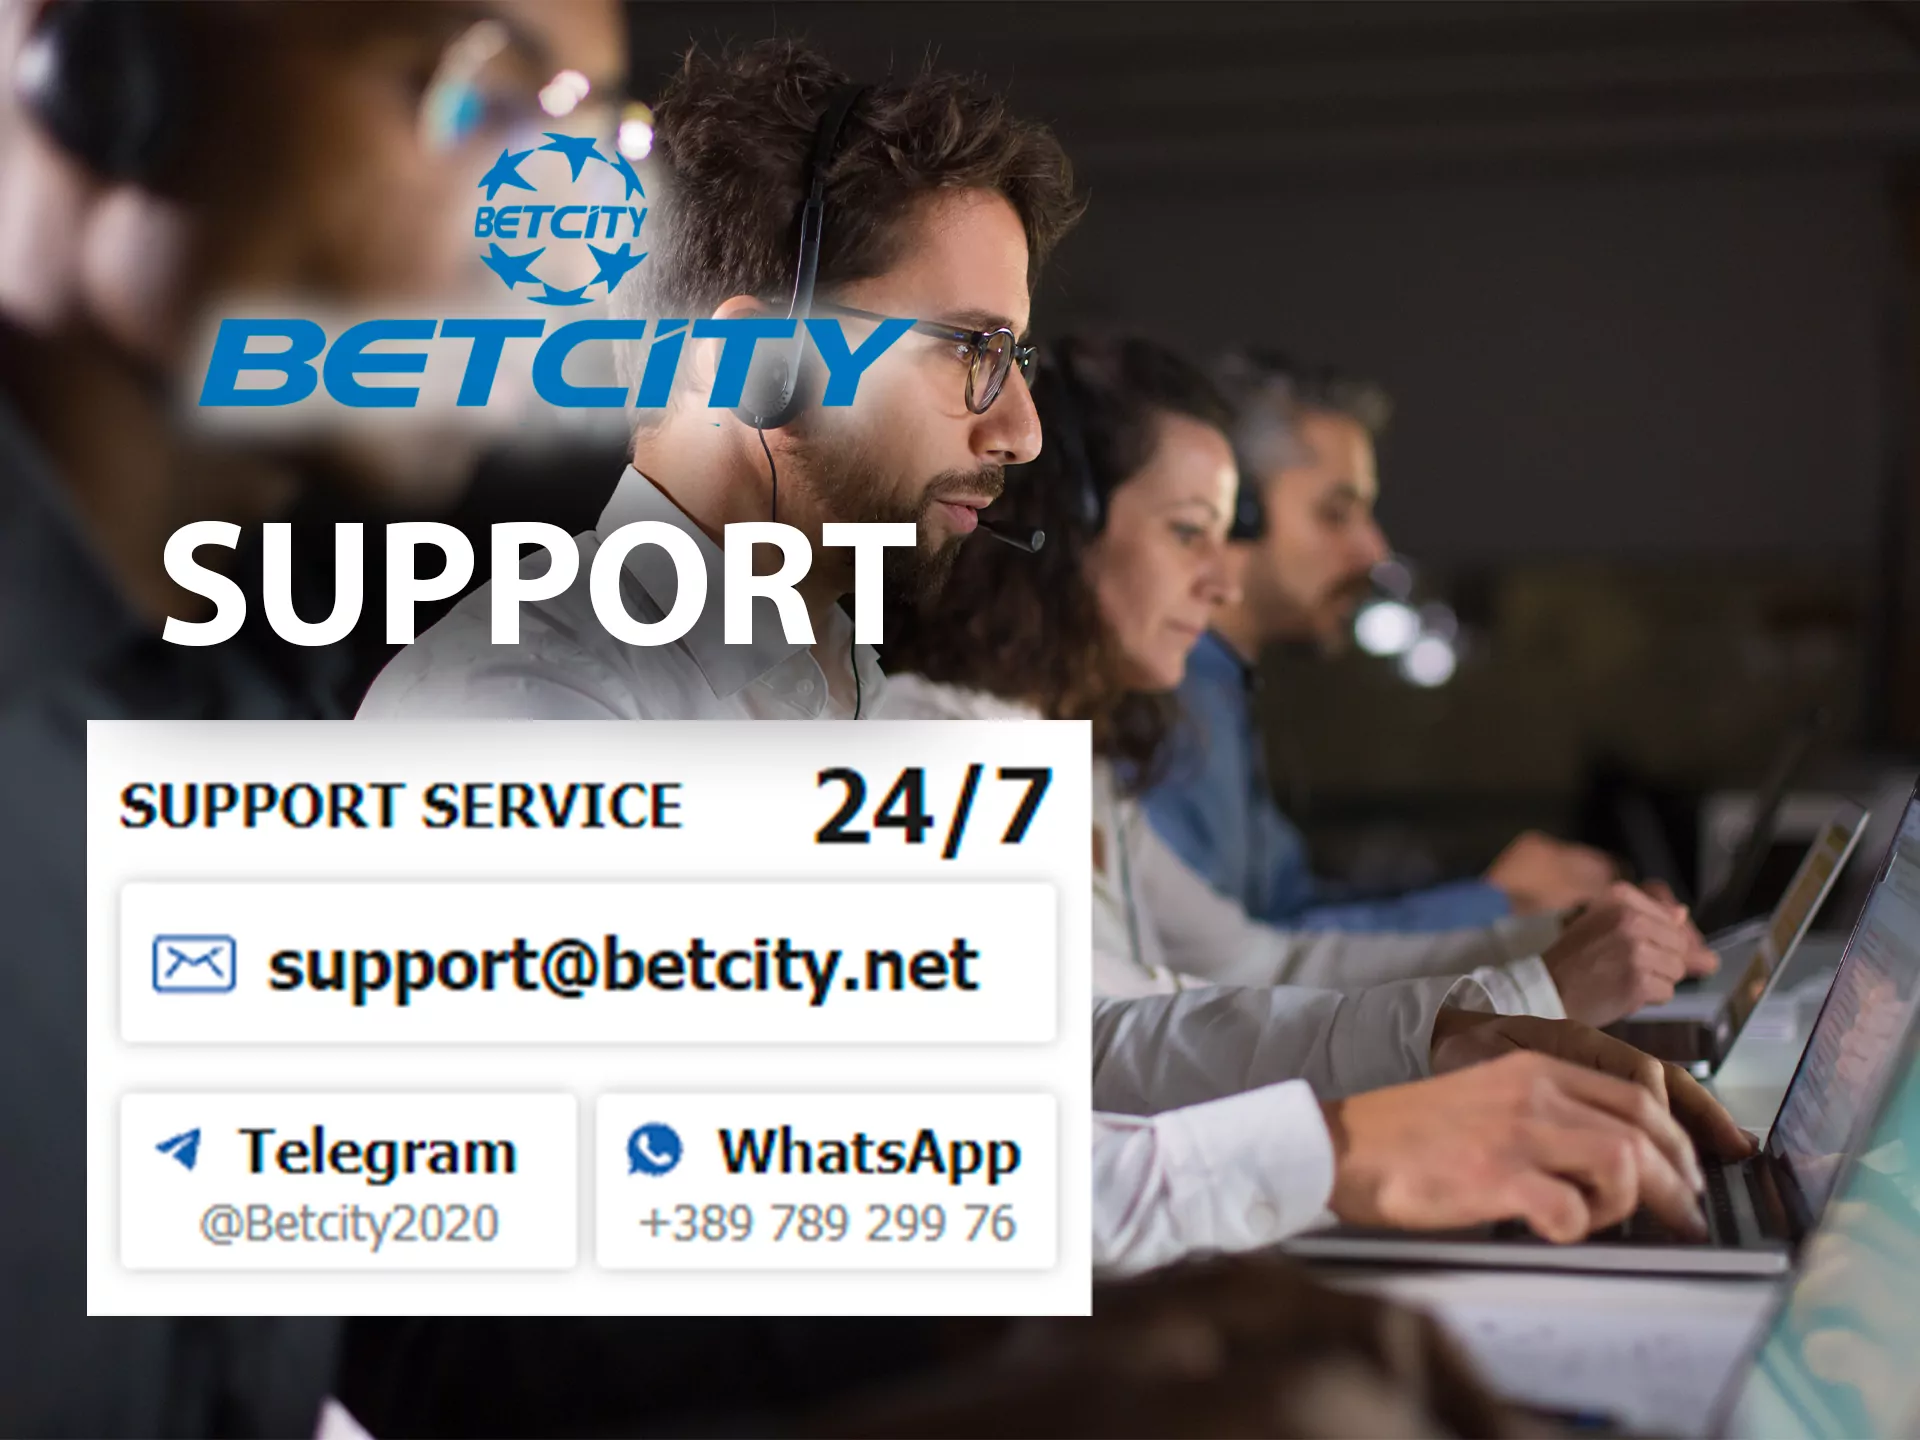 You can contact the support team any time you have a betting-related question.